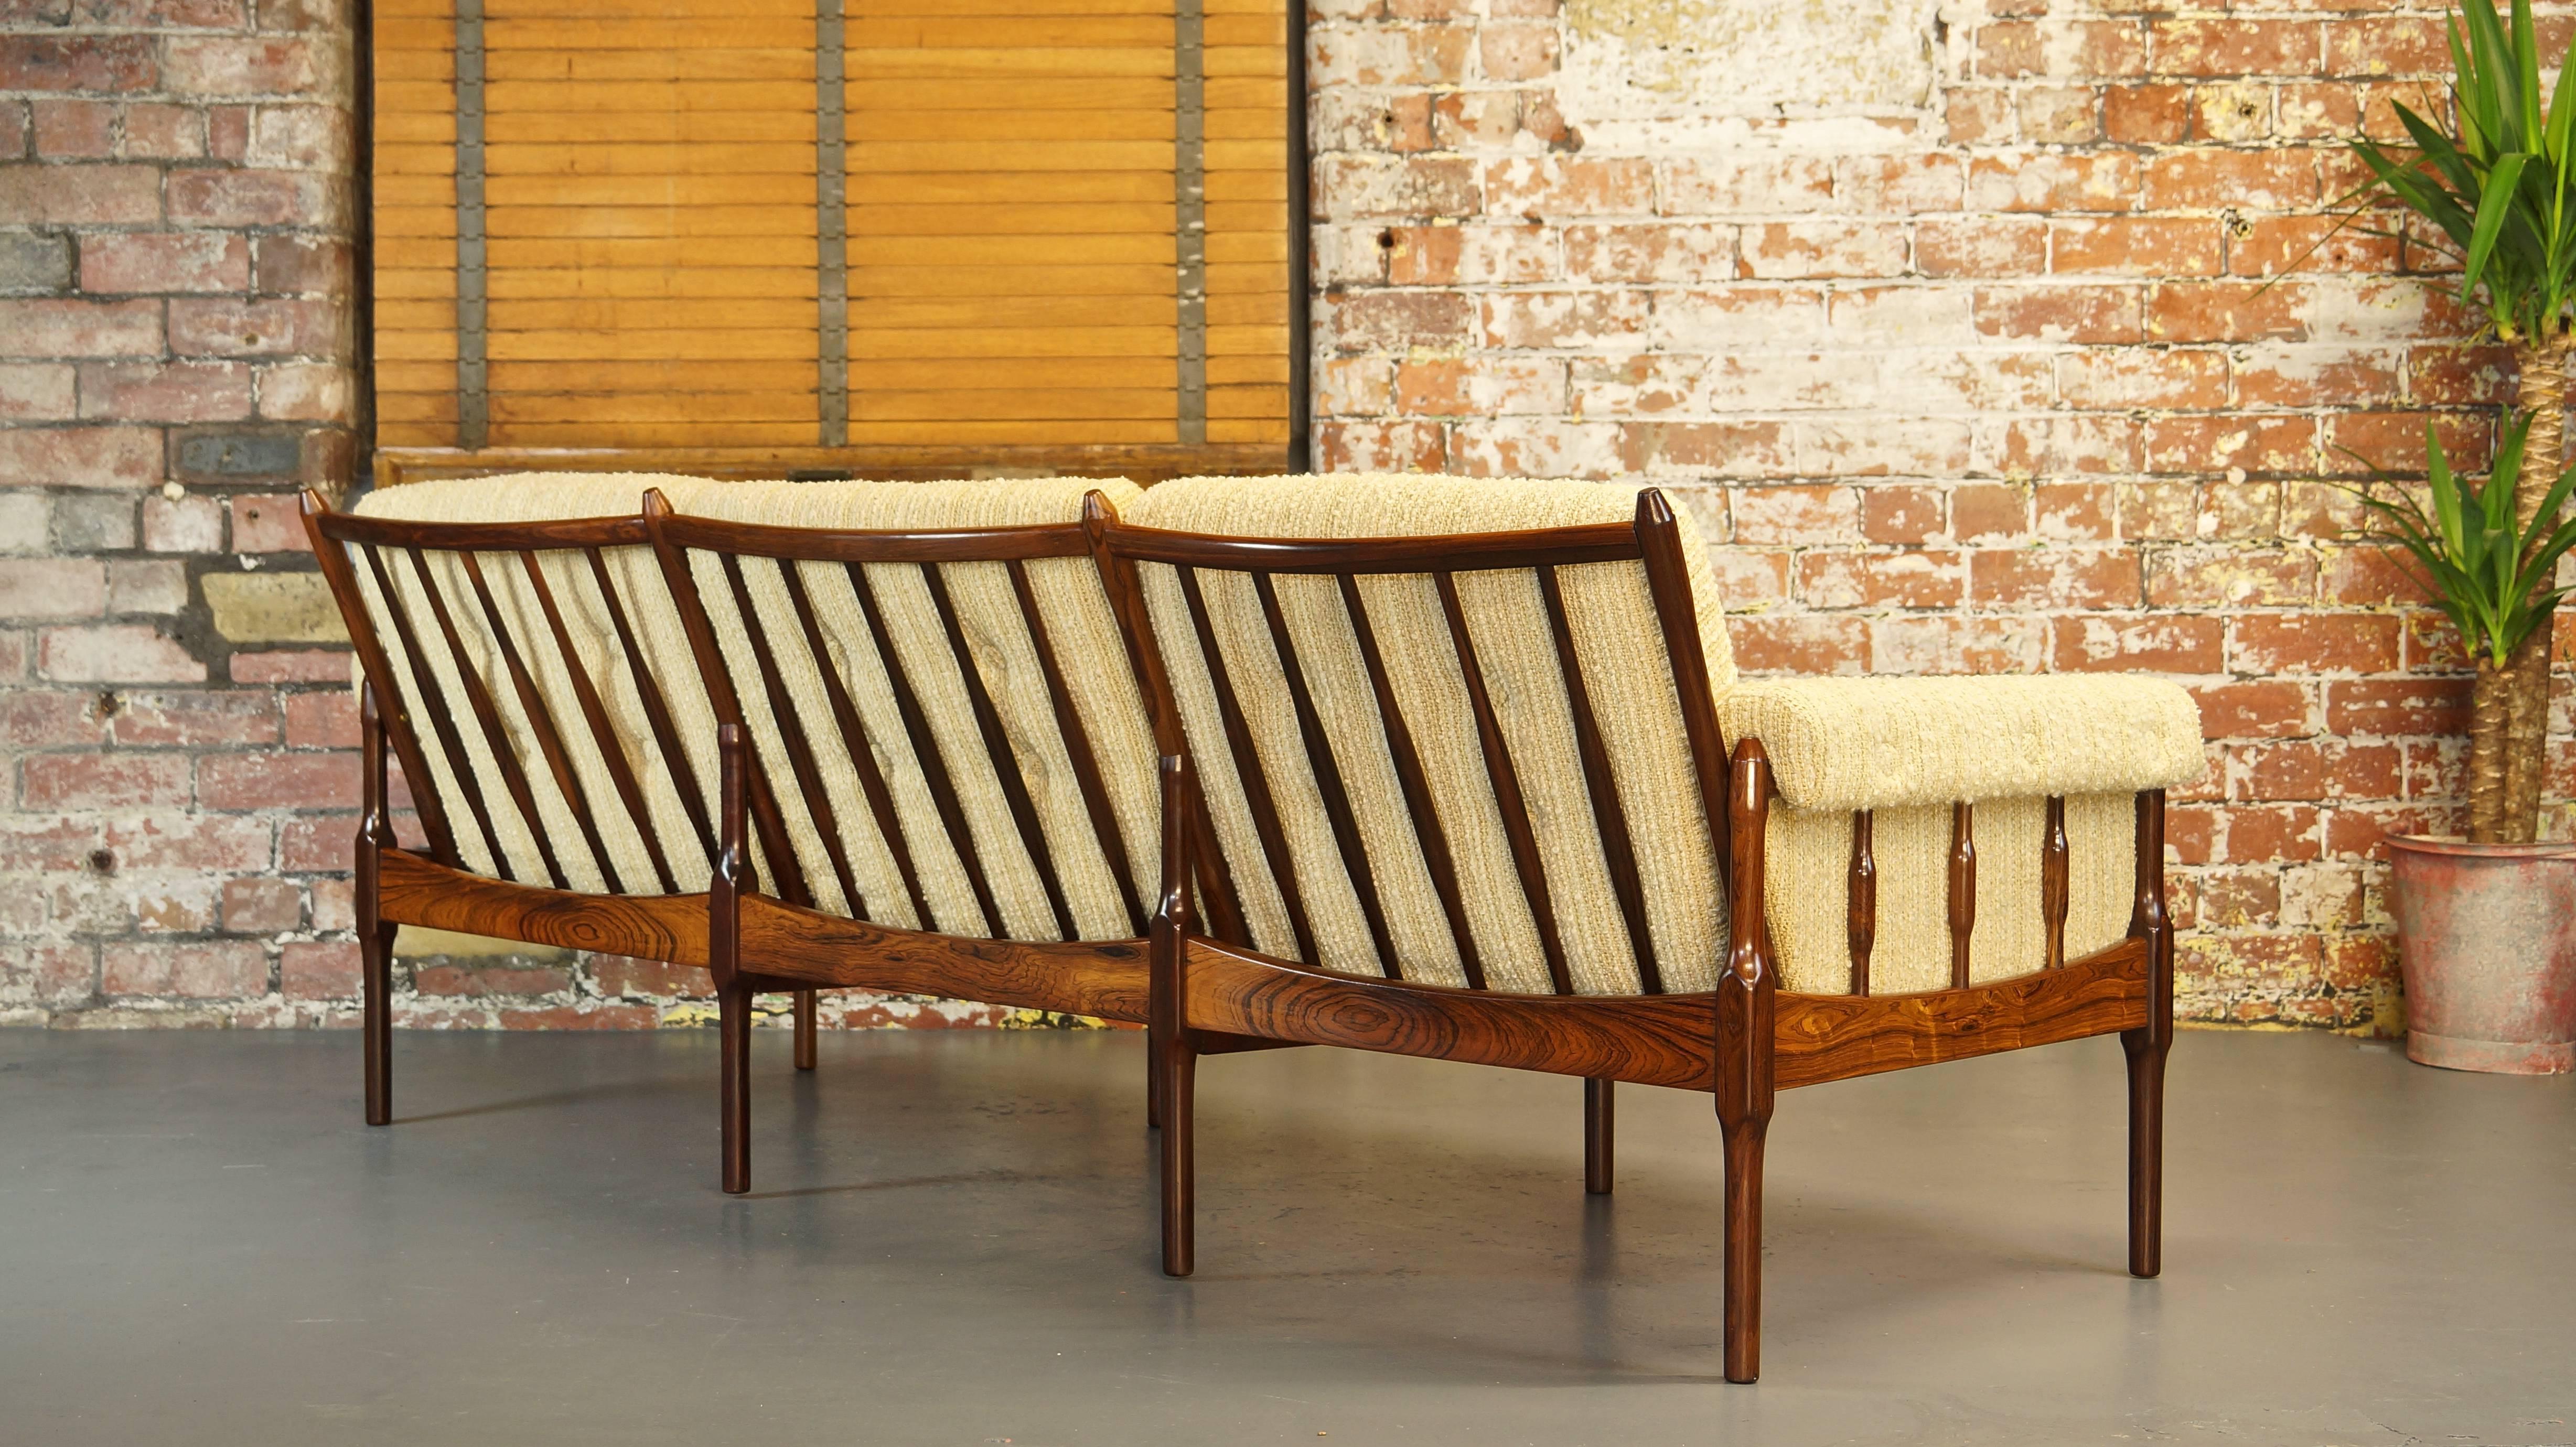 Vintage Danish rosewood sofa / settee
Designed by Torbjorn Afdal for Bruksbo
Denmark, 1960s

Solid turned rosewood three seat settee. 
Beautiful grains throughout this exceptionally constructed piece.

Measures: Height 74cm
Width